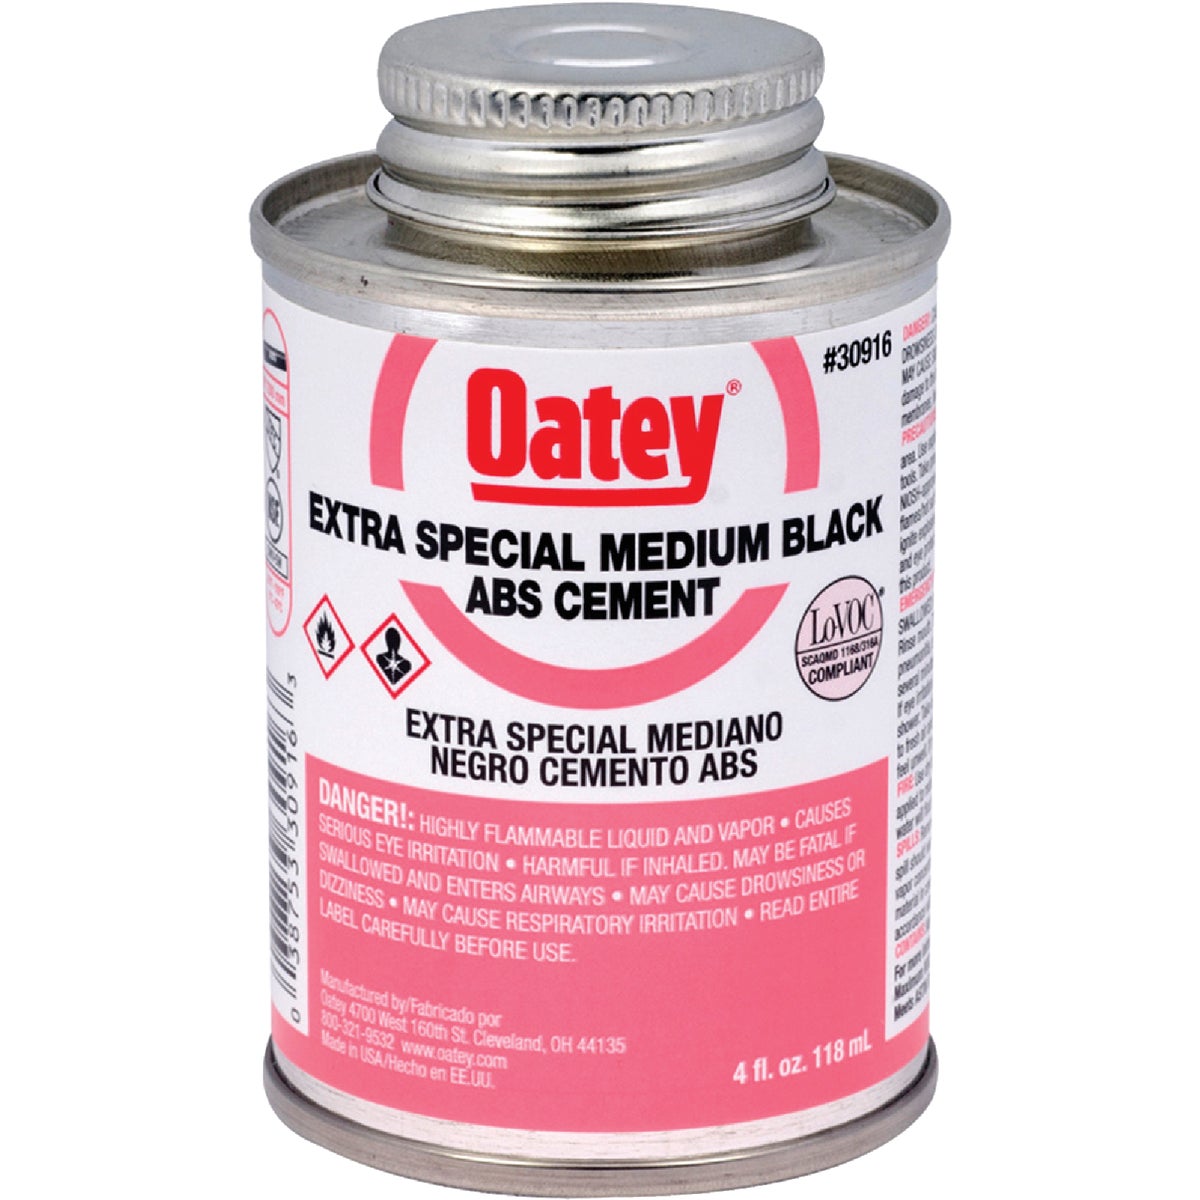 Oatey 4 Oz. Medium Bodied Black Extra Special ABS Cement